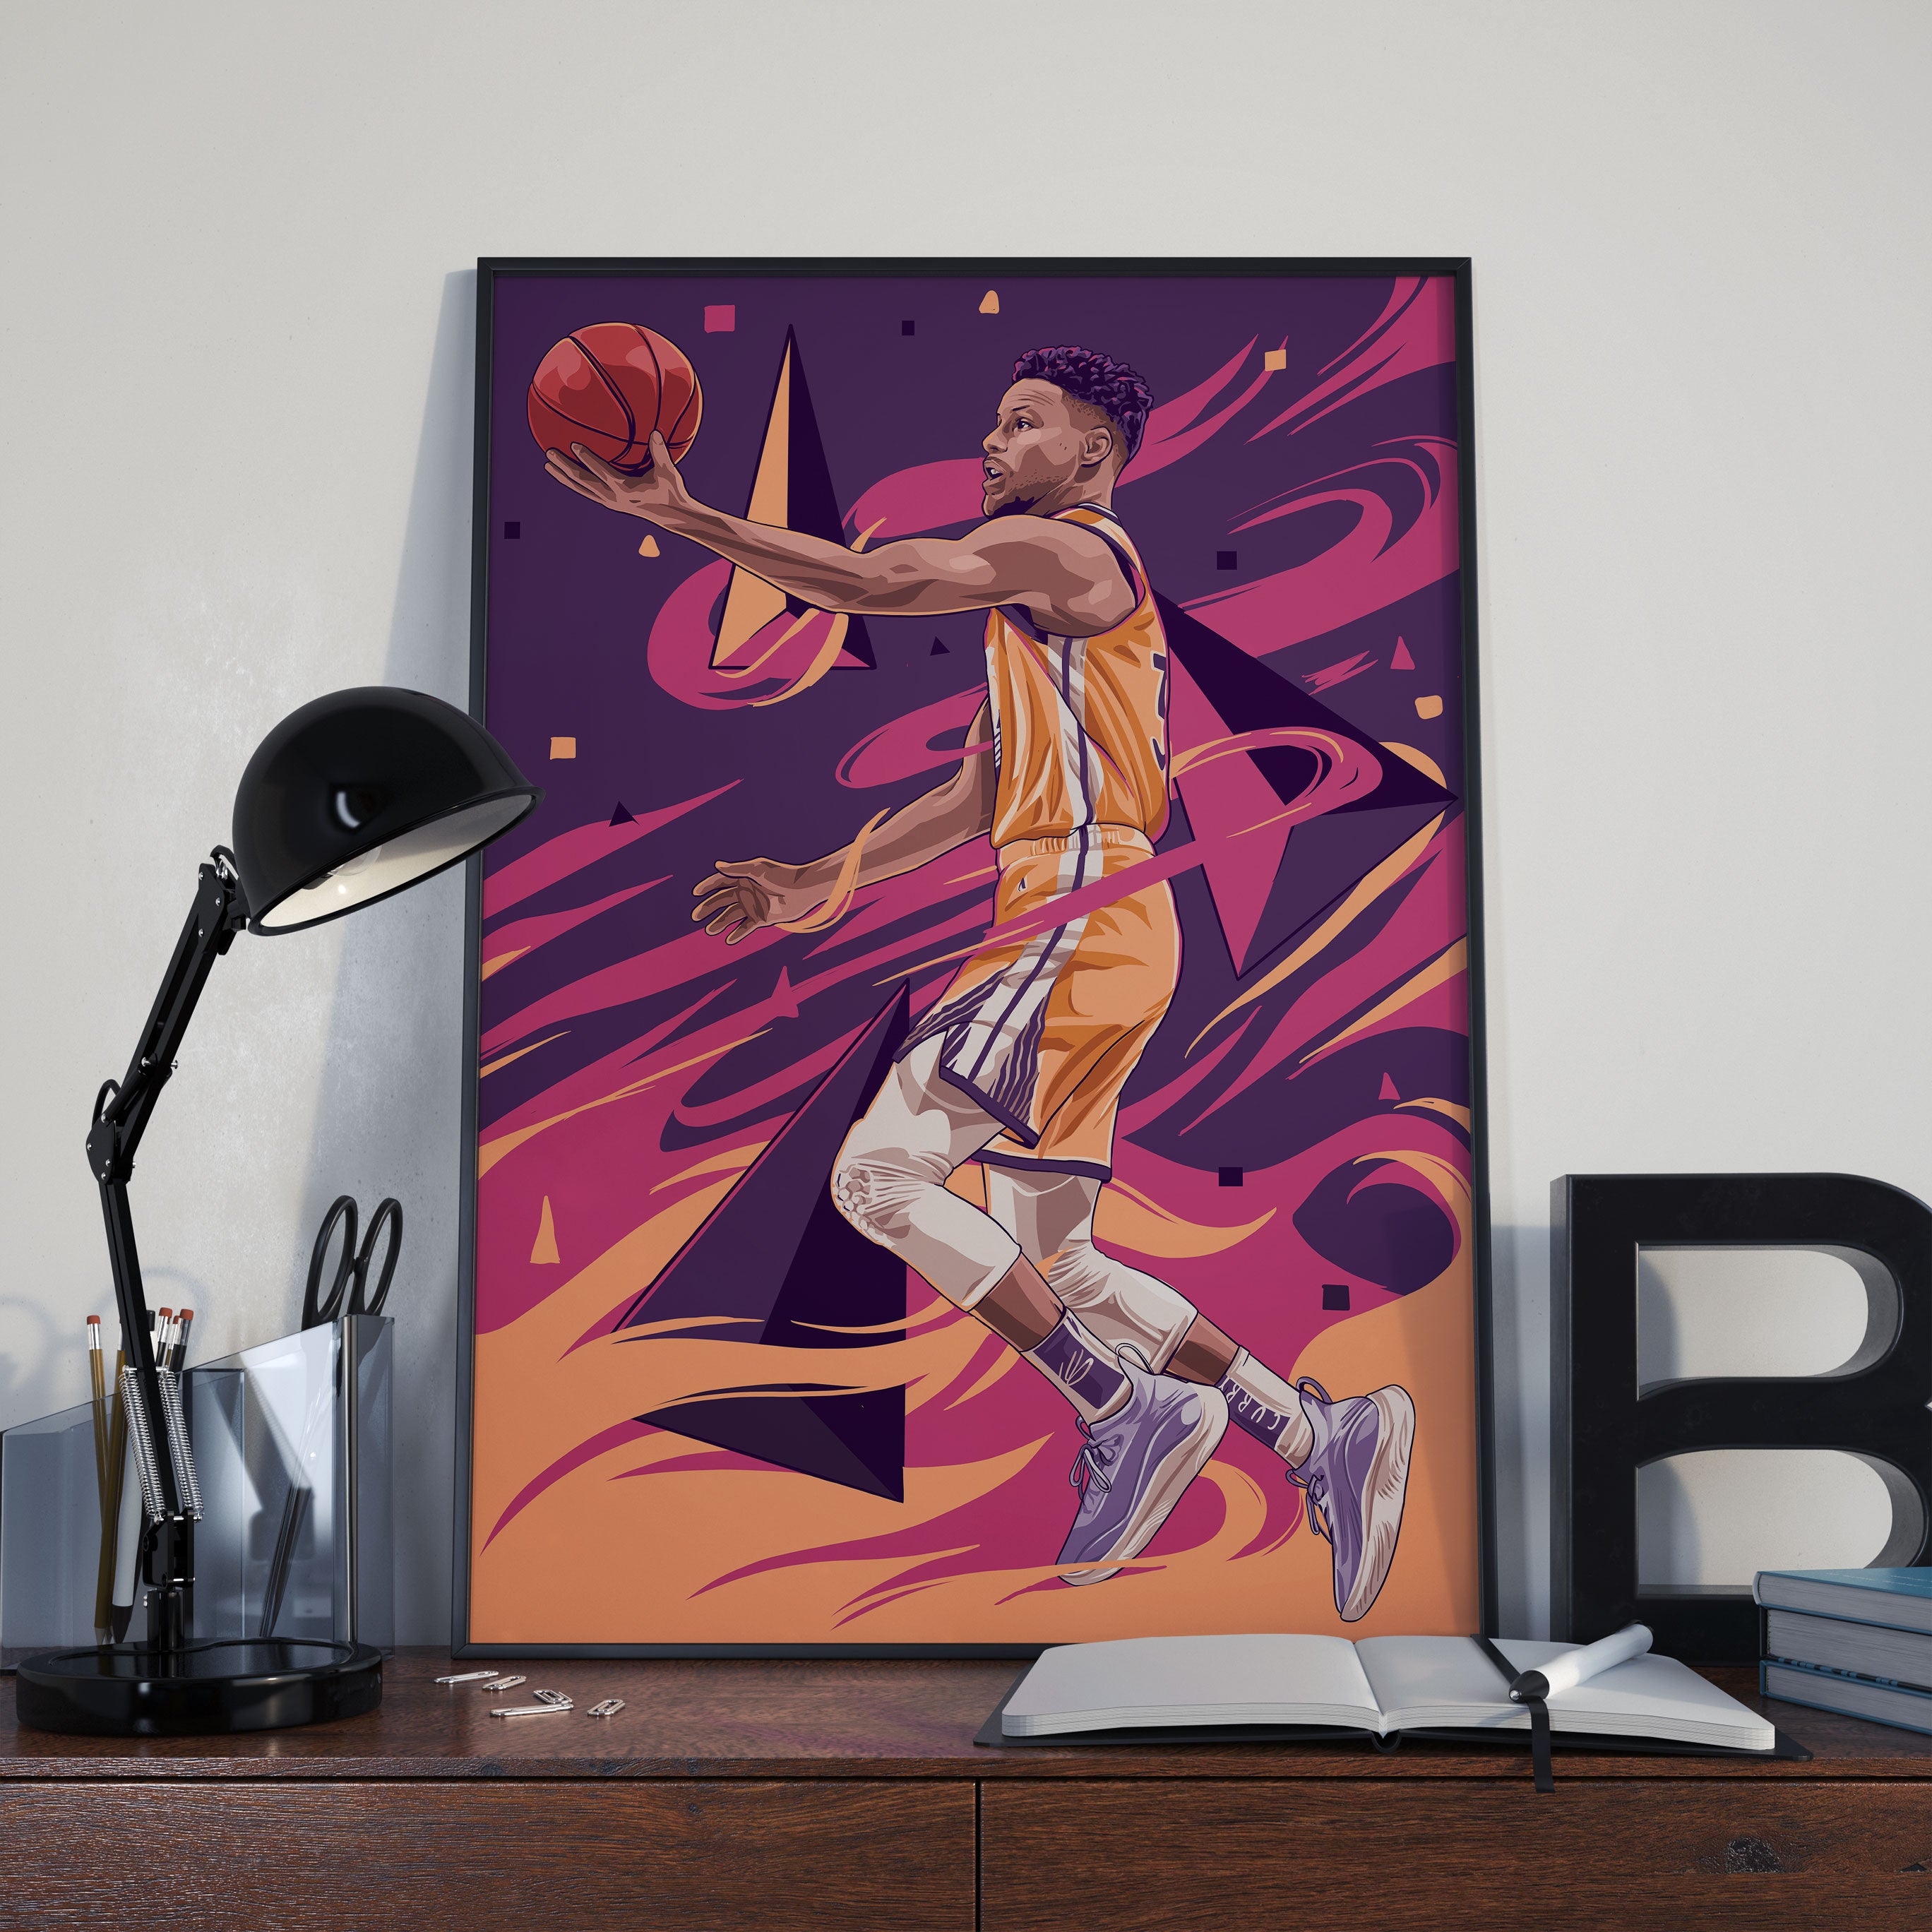  ORIMAMI Gifts for Basketball Player Stephen Curry Fans,Sport  Superstar Picture Desktop Framed Photo 8x6 Inches with Printed Signed and  1x35mm Film Mini Cell Display: Posters & Prints